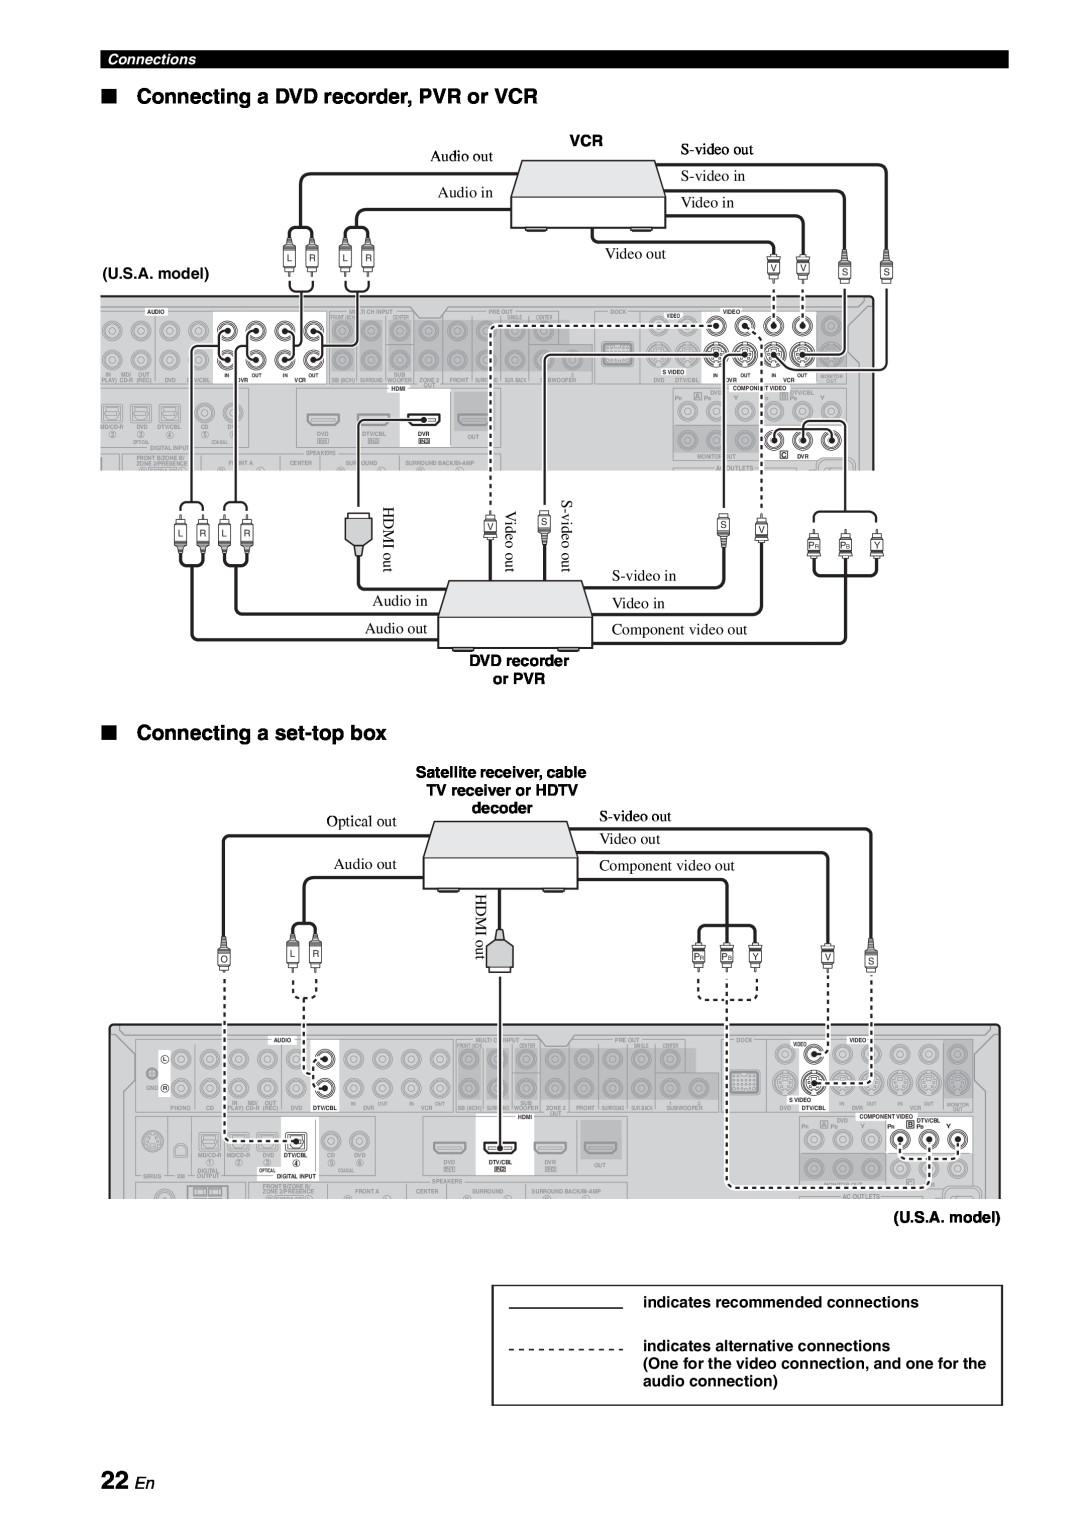 Yamaha RX-V863 owner manual 22 En, Connecting a DVD recorder, PVR or VCR, Connecting a set-topbox 